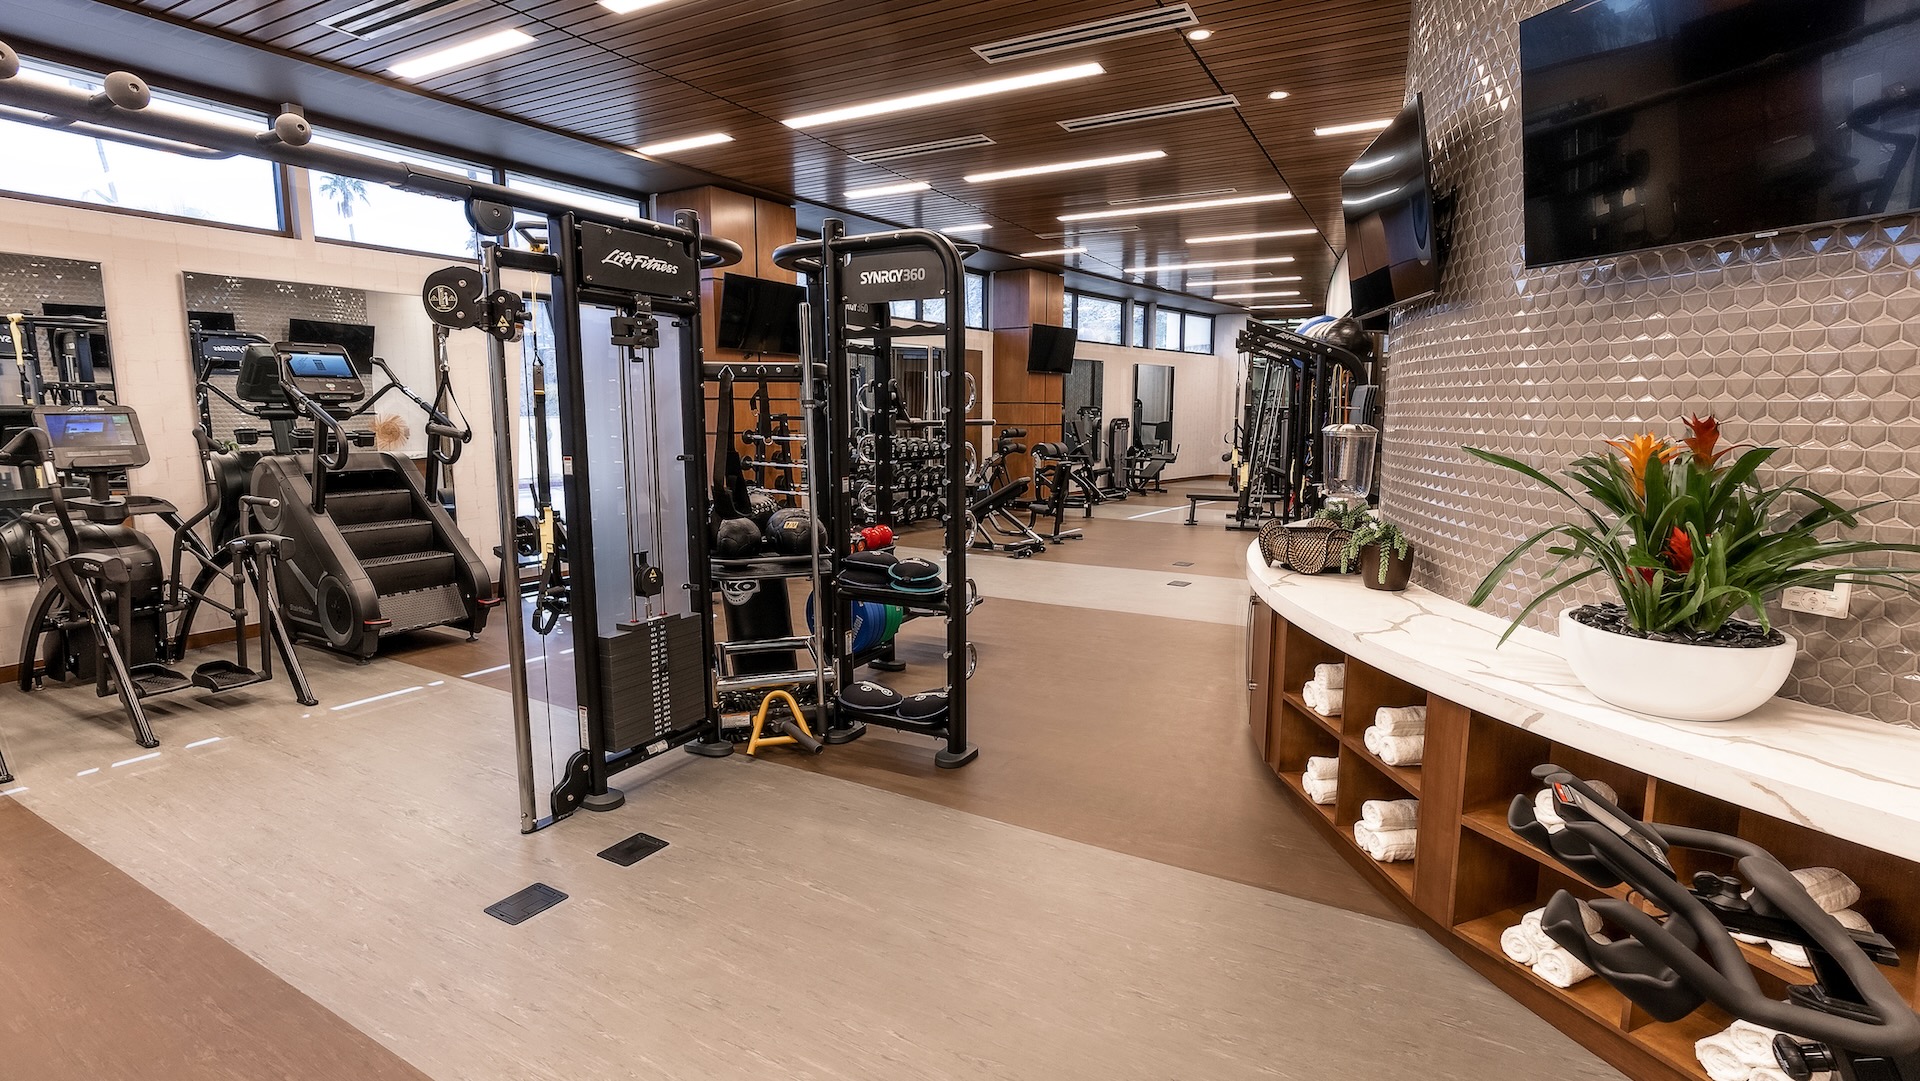 The Spa at Séc-he, Fitness Center, Spas of America